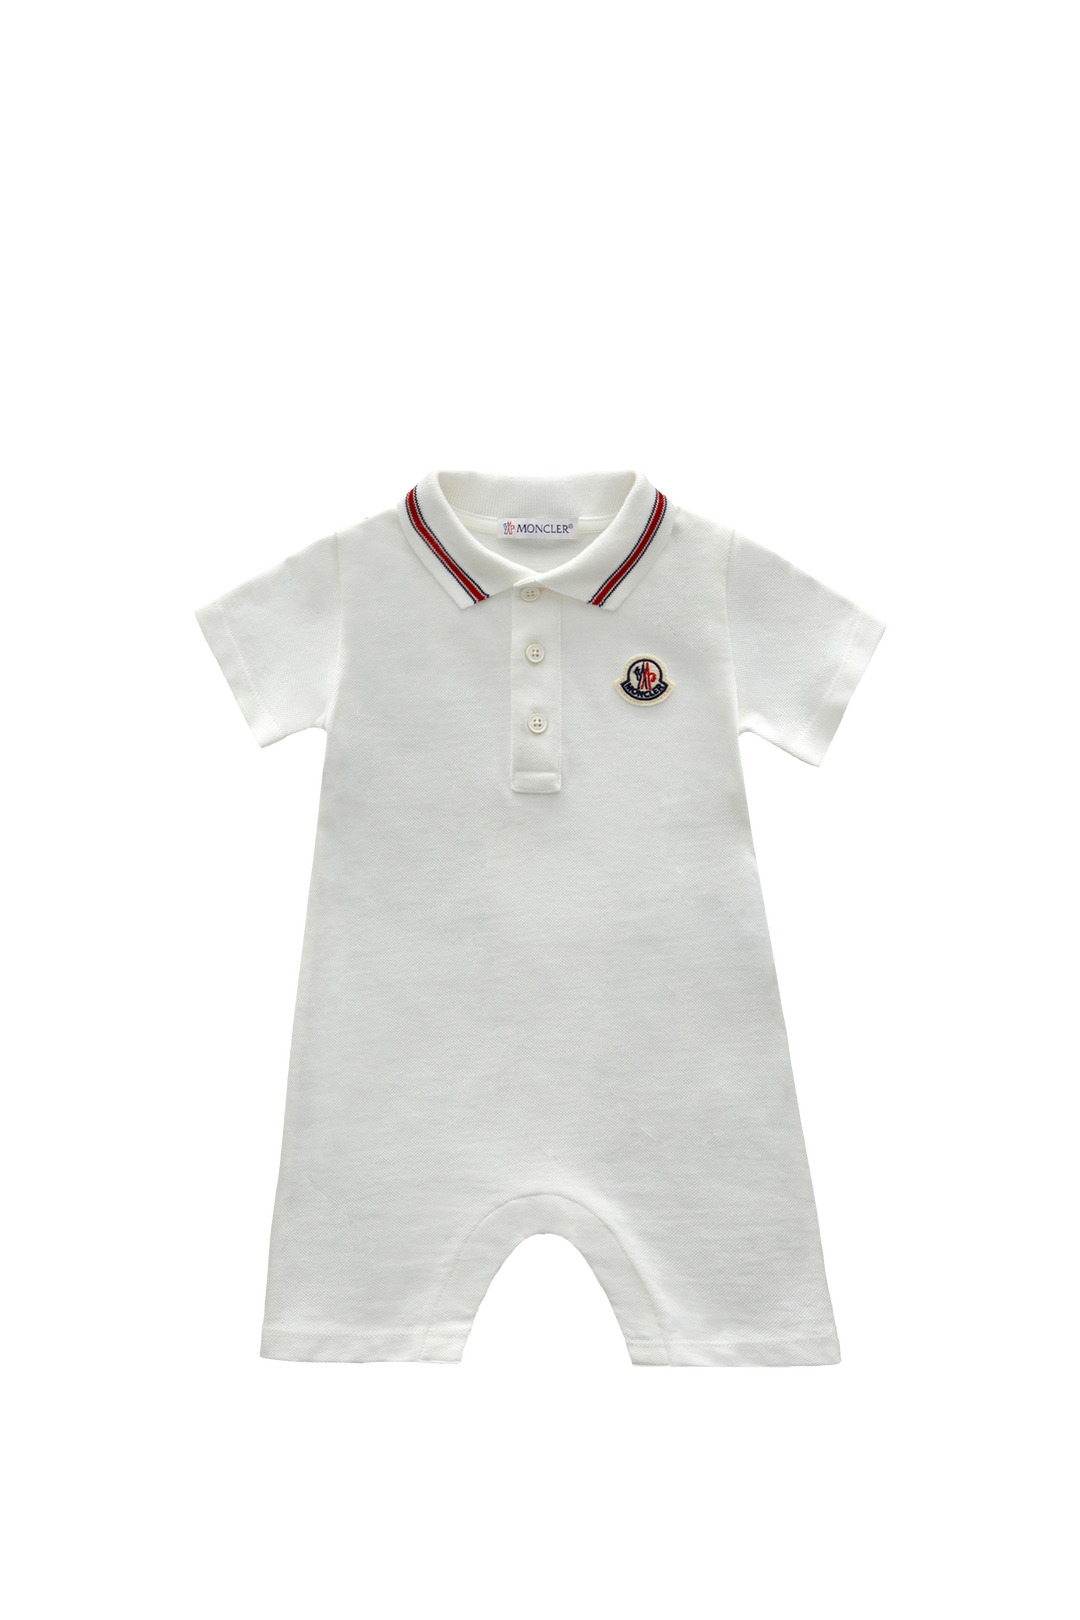 moncler-Baby White & Red Romper-h1-951-8l000-07-8496f-034